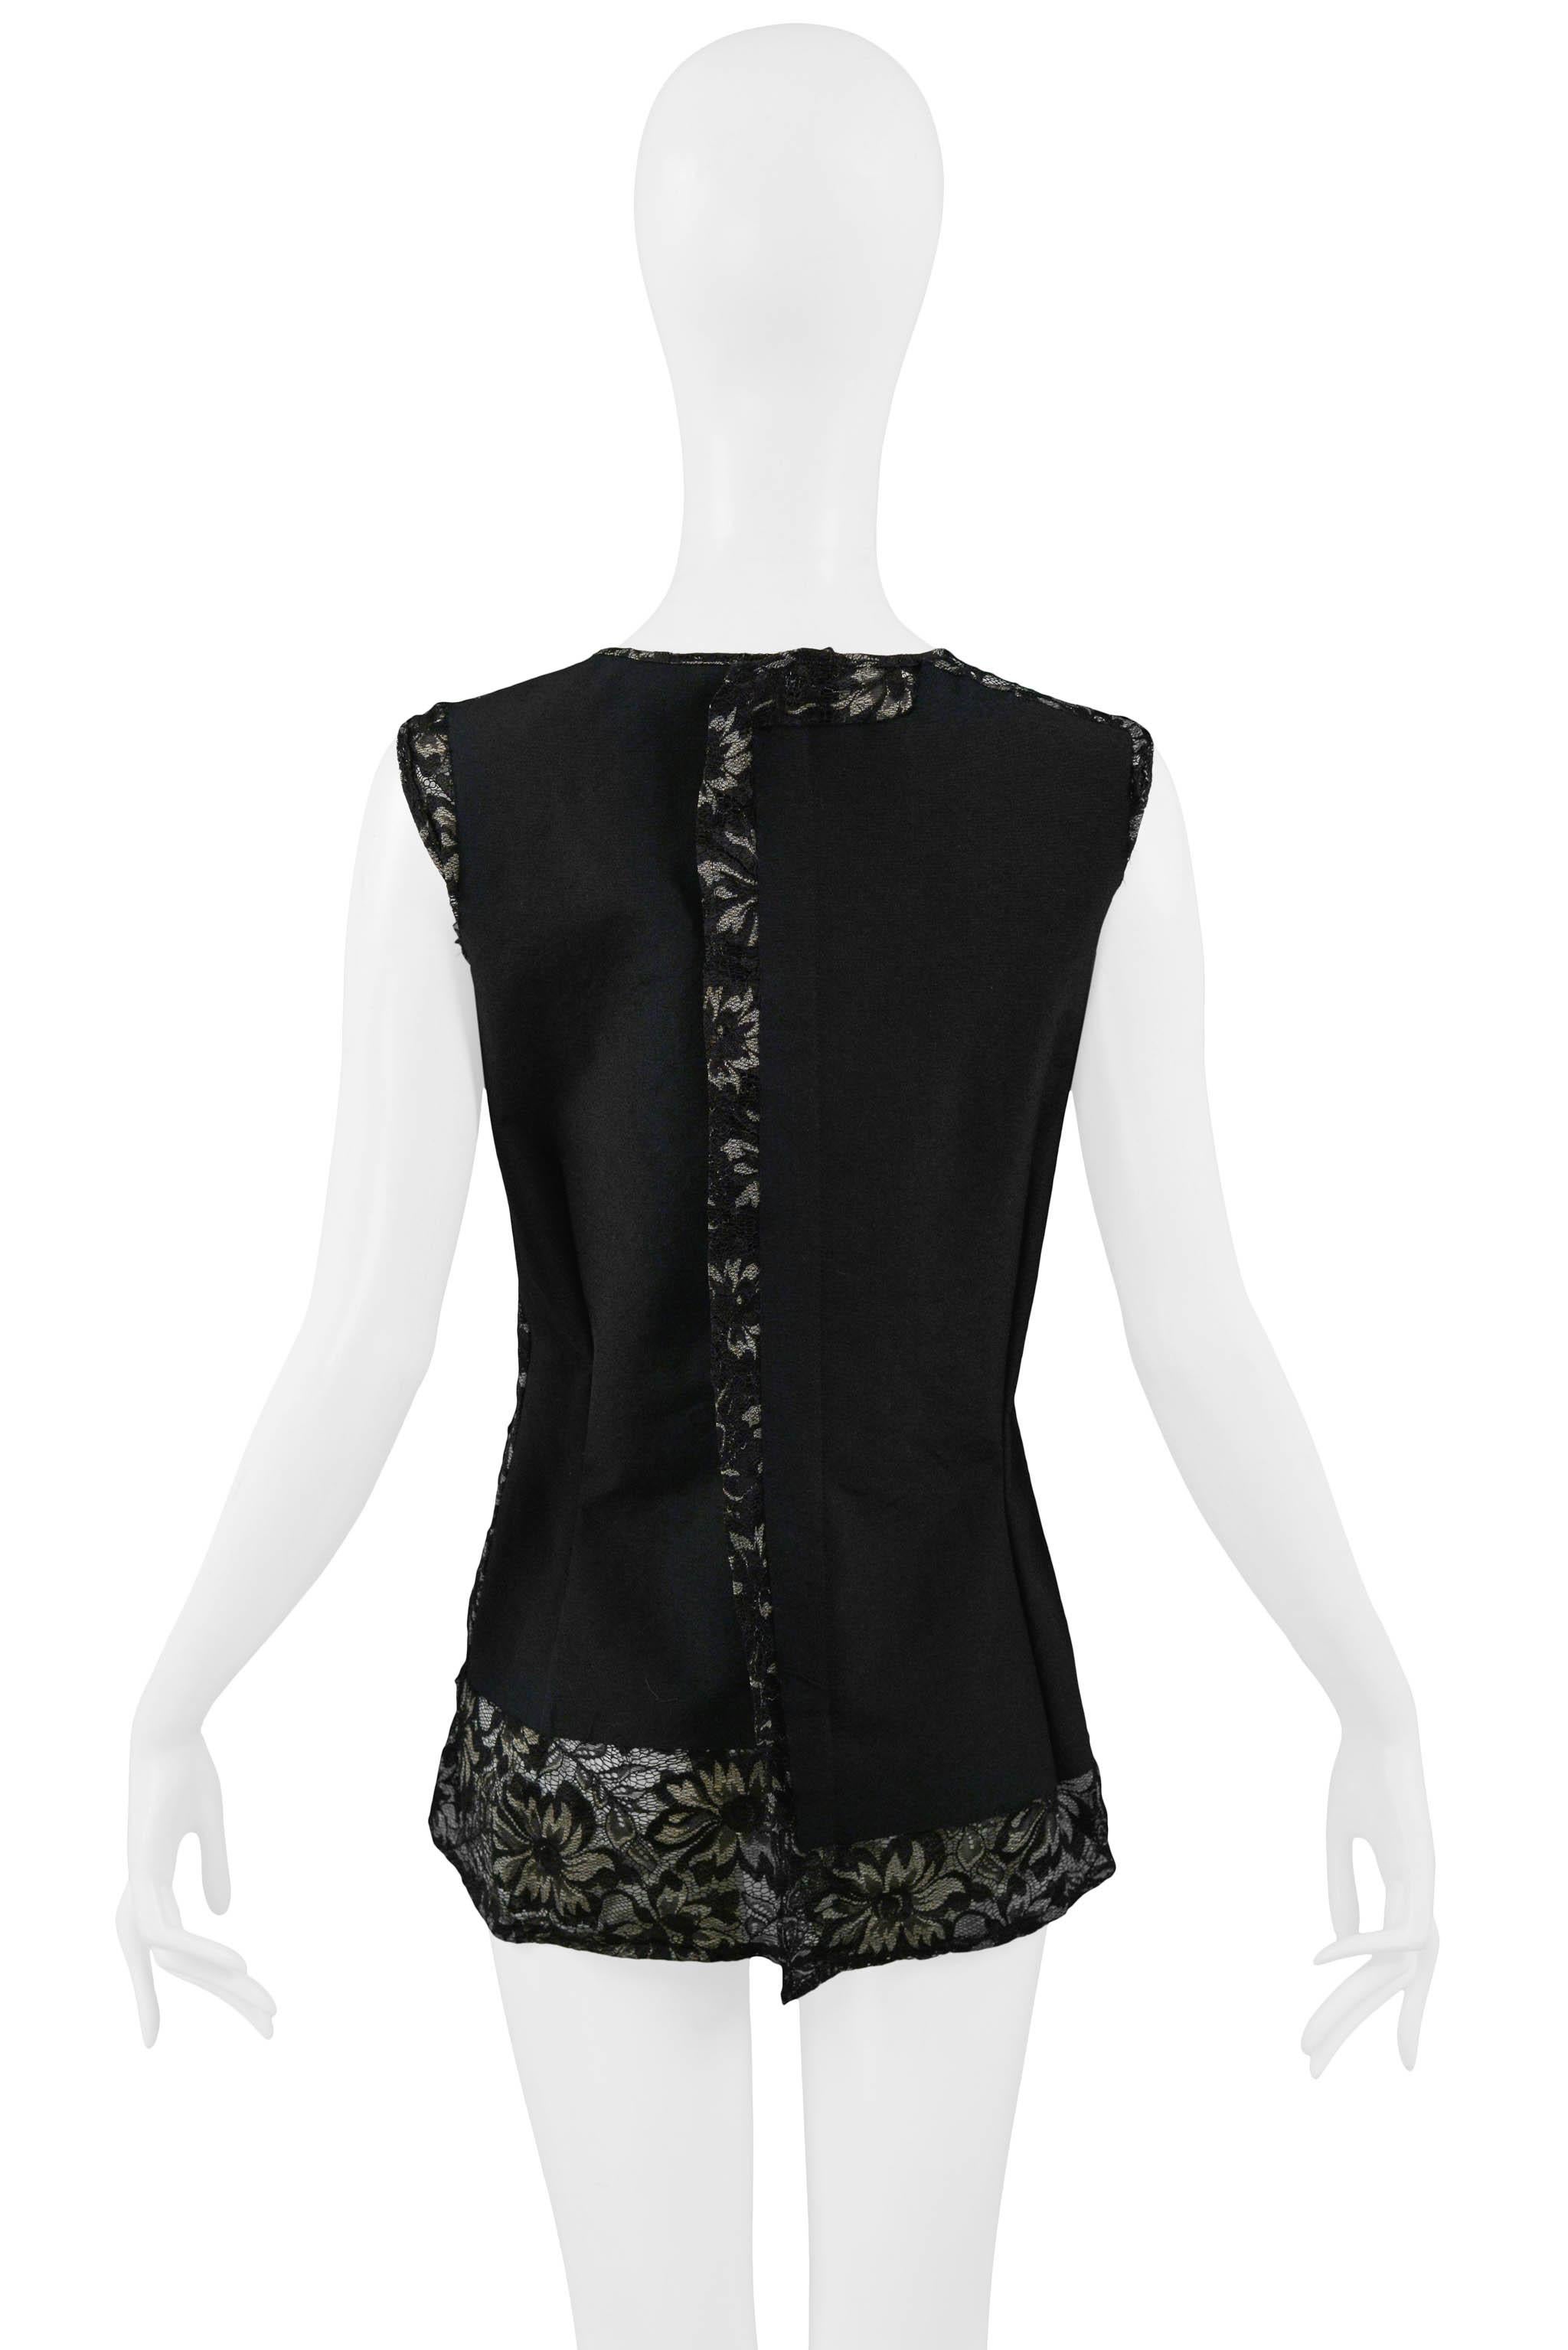 Comme Des Garcons Black & Lace Abstract Top 1997 In Excellent Condition For Sale In Los Angeles, CA